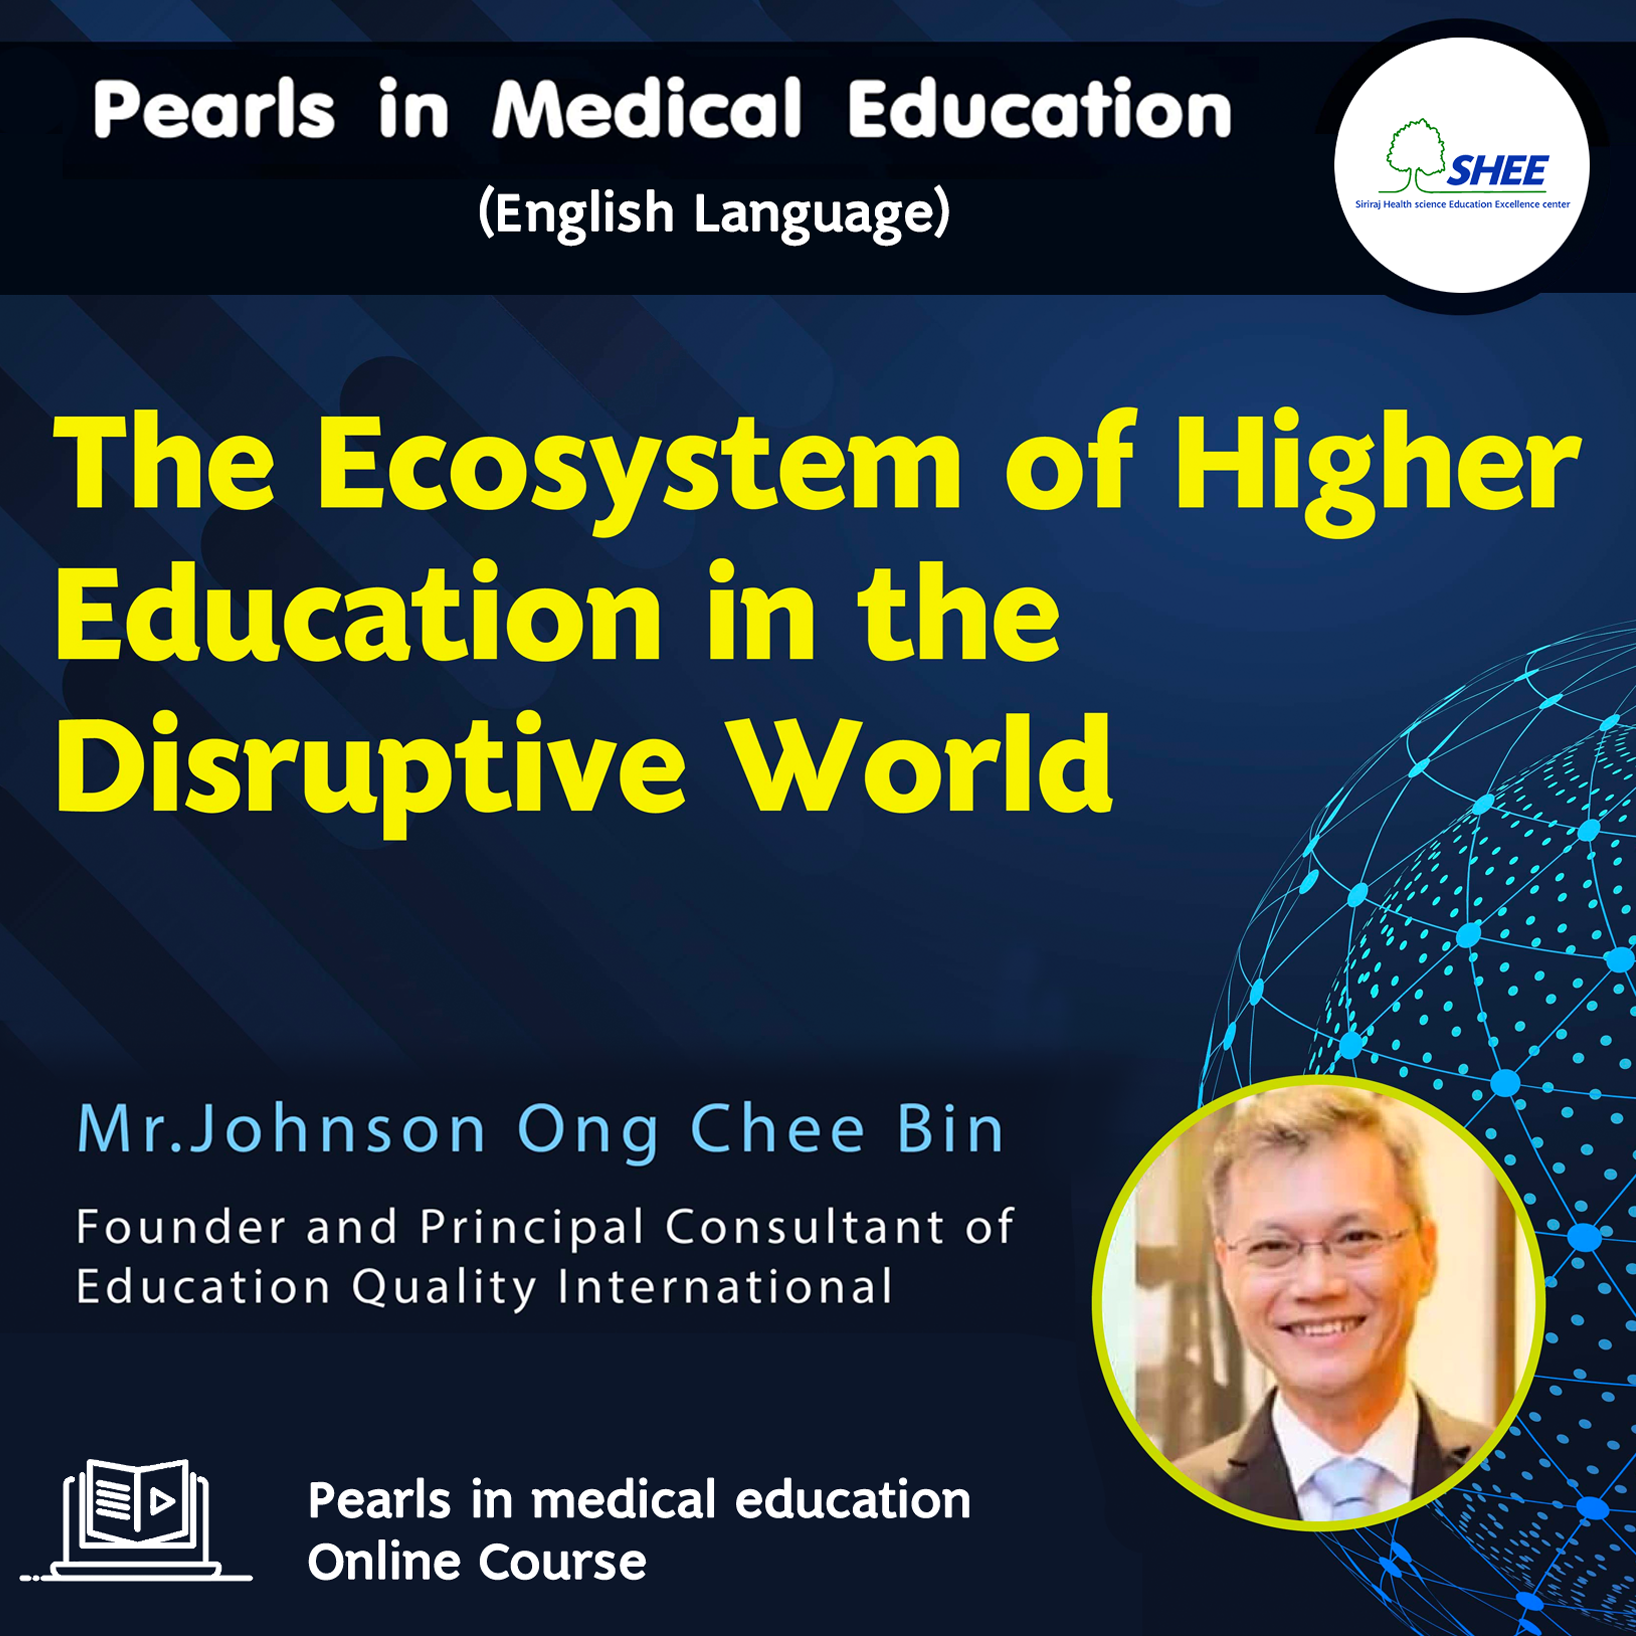 The ecosystem of higher education in the disruptive world